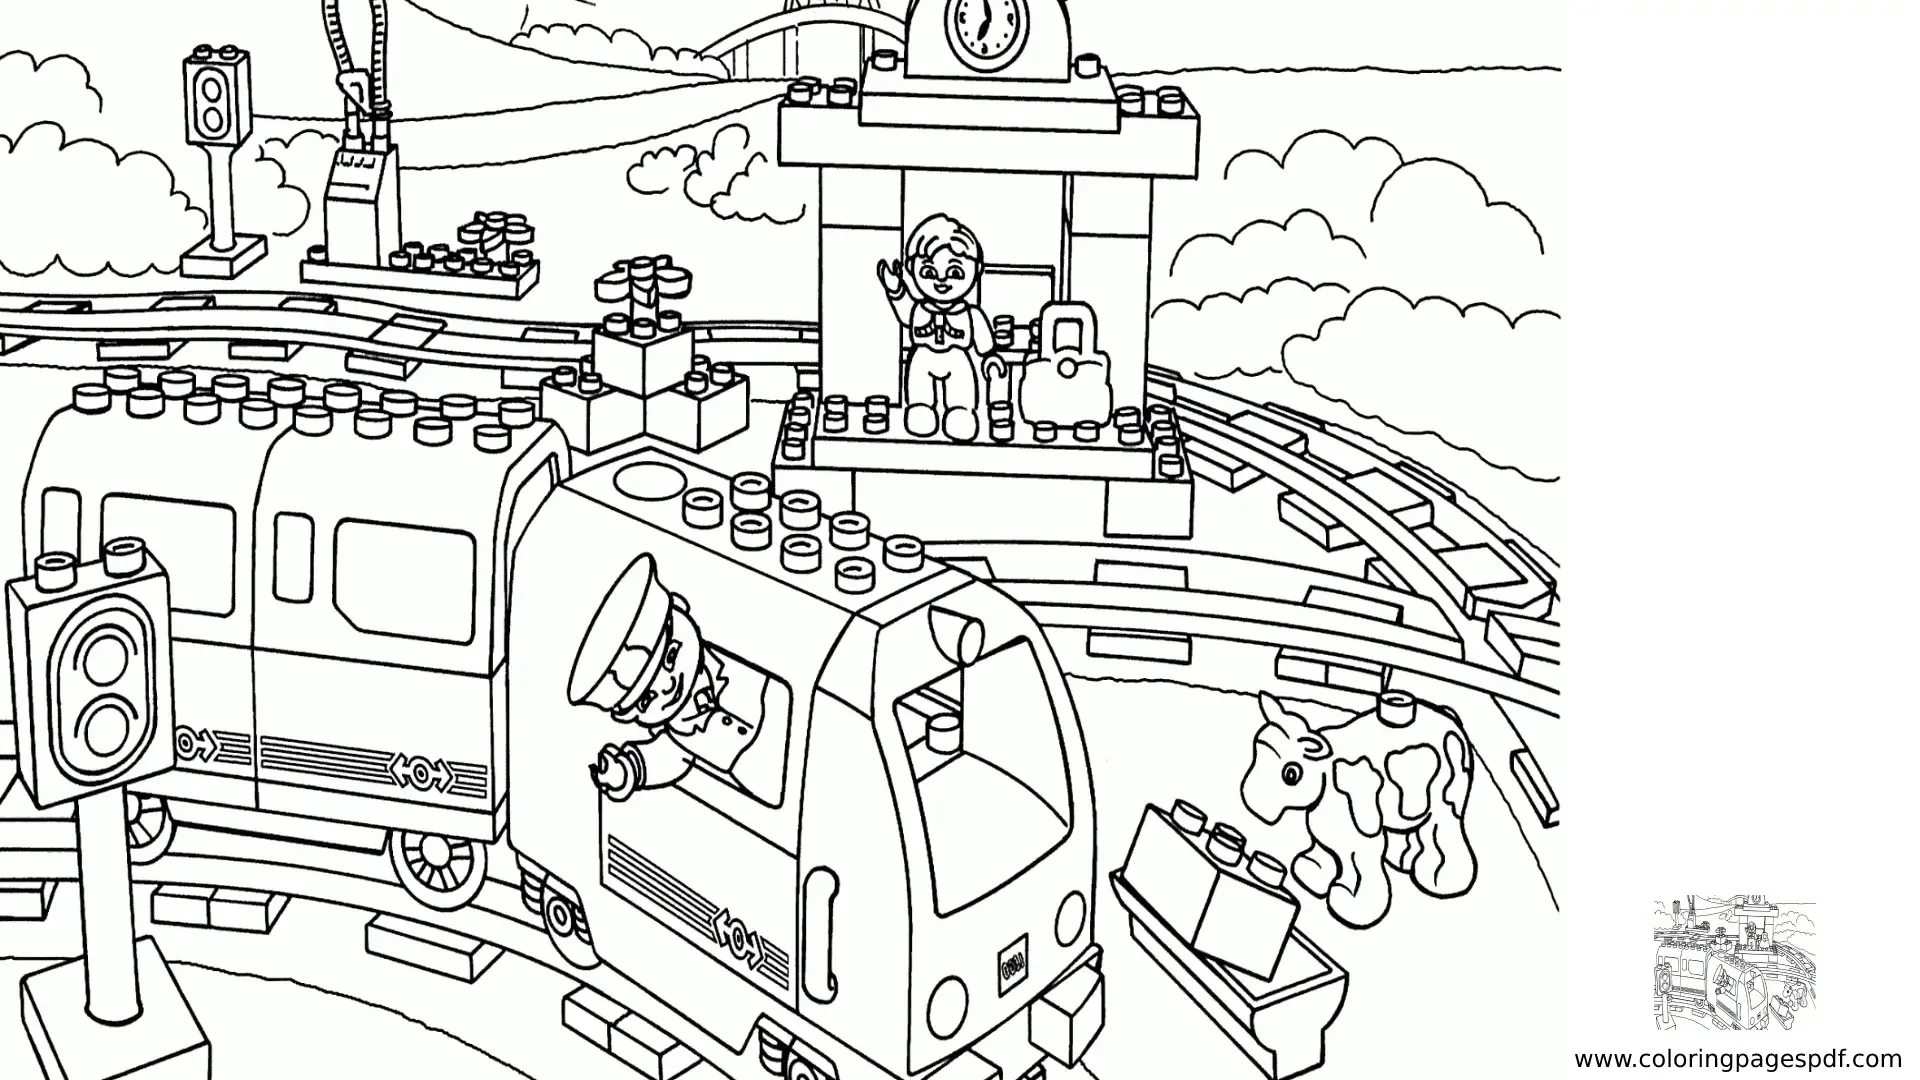 Coloring Pages Of Lego City Train